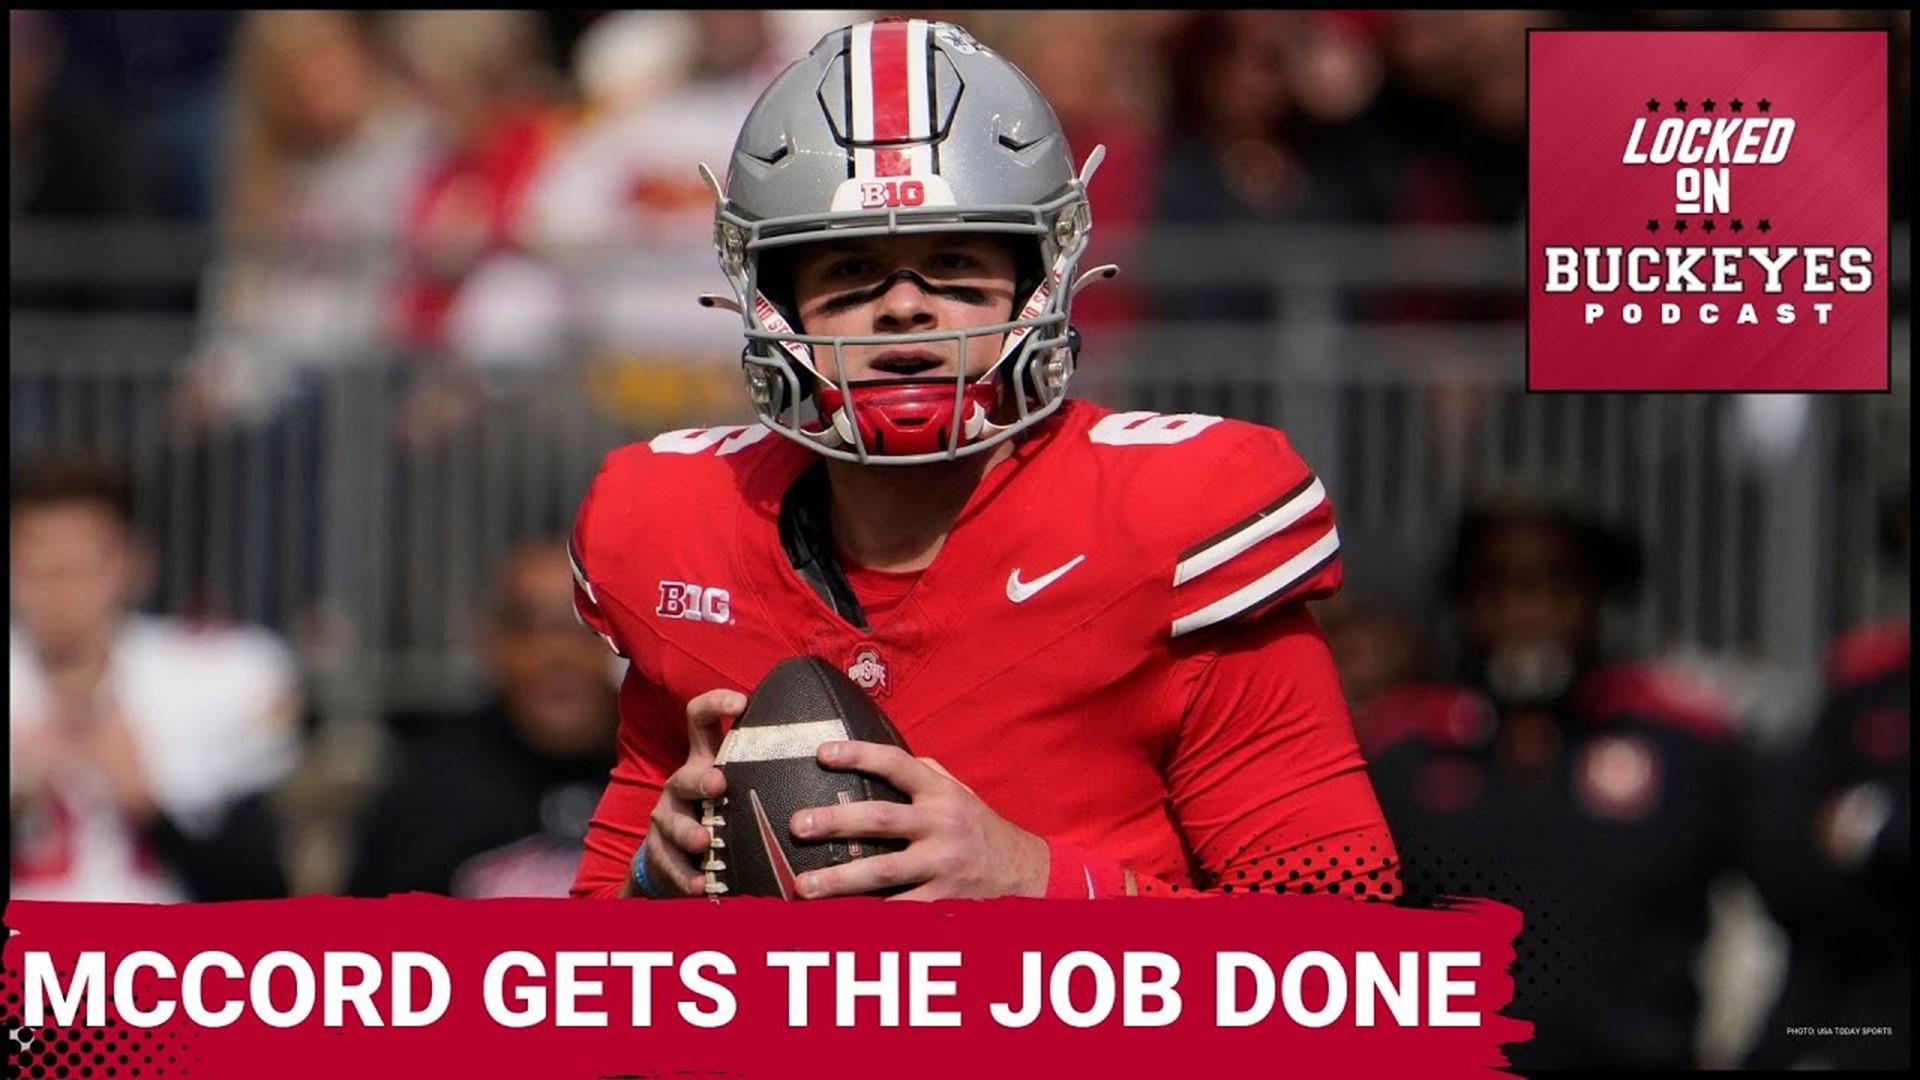 Ohio State's win over Maryland was the type of game that can help the Buckeyes build confidence as they get into the heart of their Big Ten schedule.